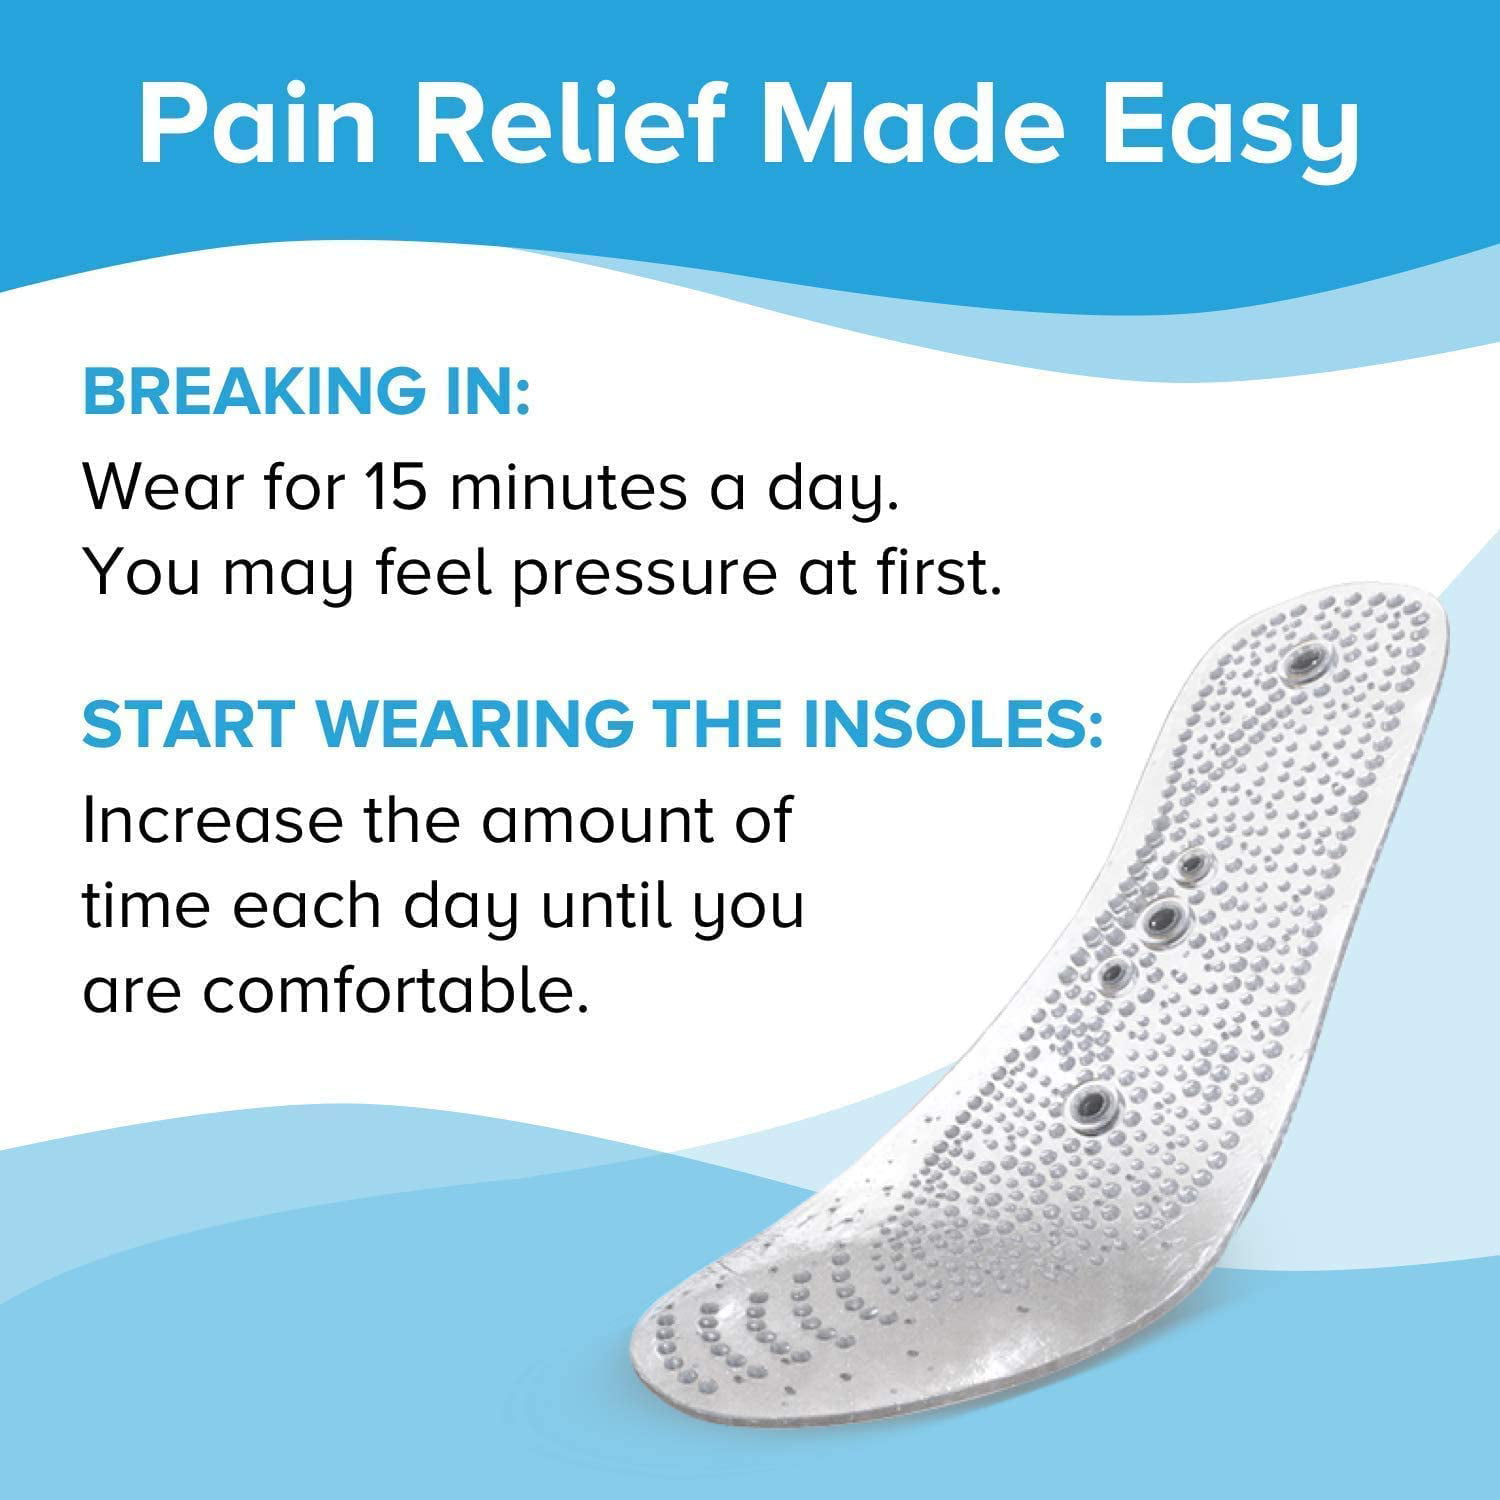 MindInSole Acupressure Magnetic Massage Foot Therapy Reflexology Pain Relief Pad 